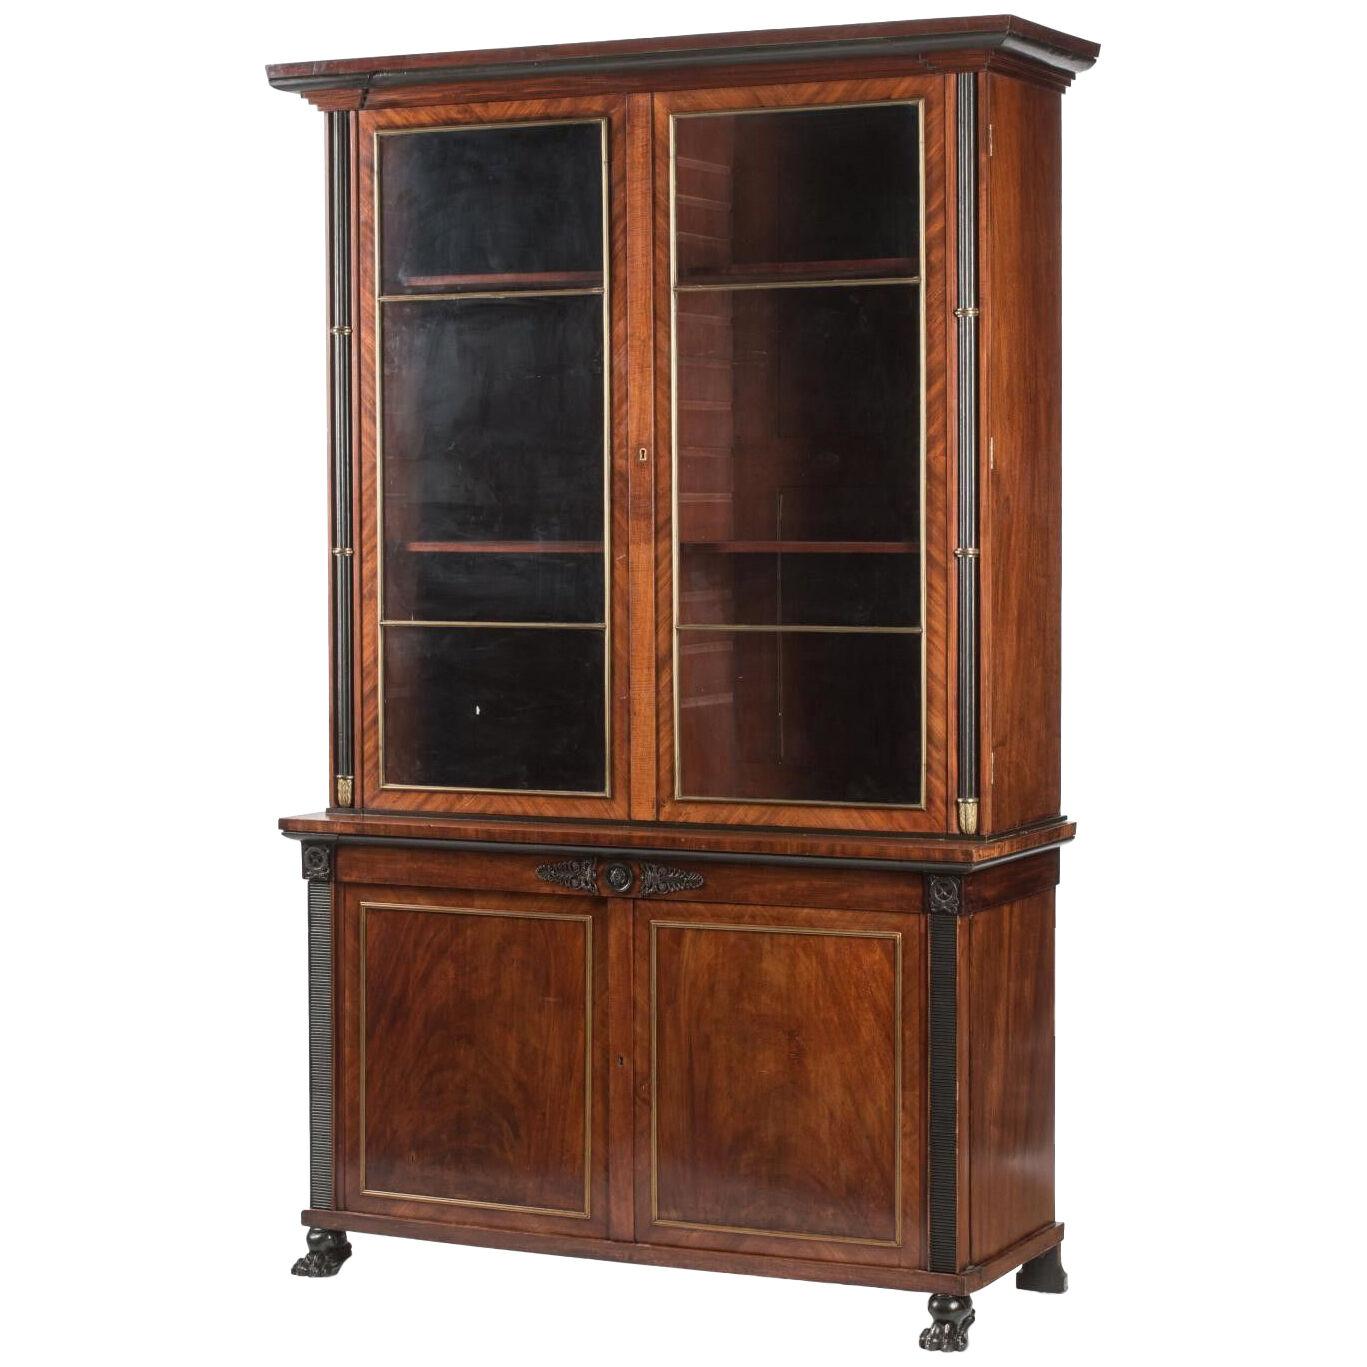 English Regency Mahogany Bookcase / Library Cabinet with Gilt Bronze Trim